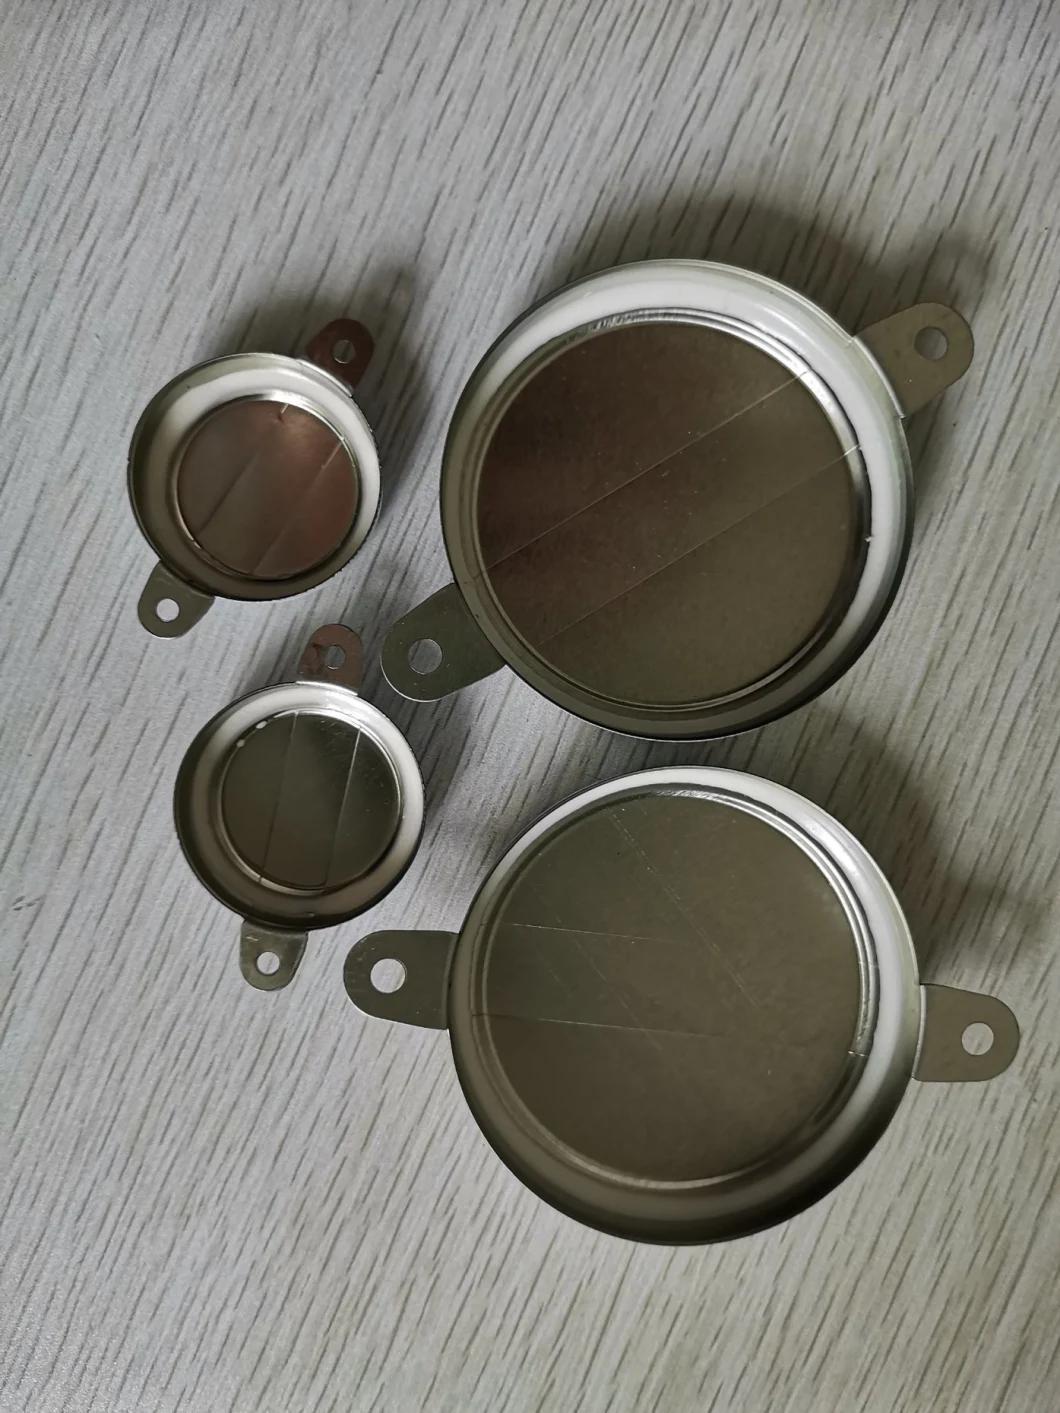 2′ ′ and 3/4′ ′ Metal Drum Closures (flanges+plugs) for Oil Drums